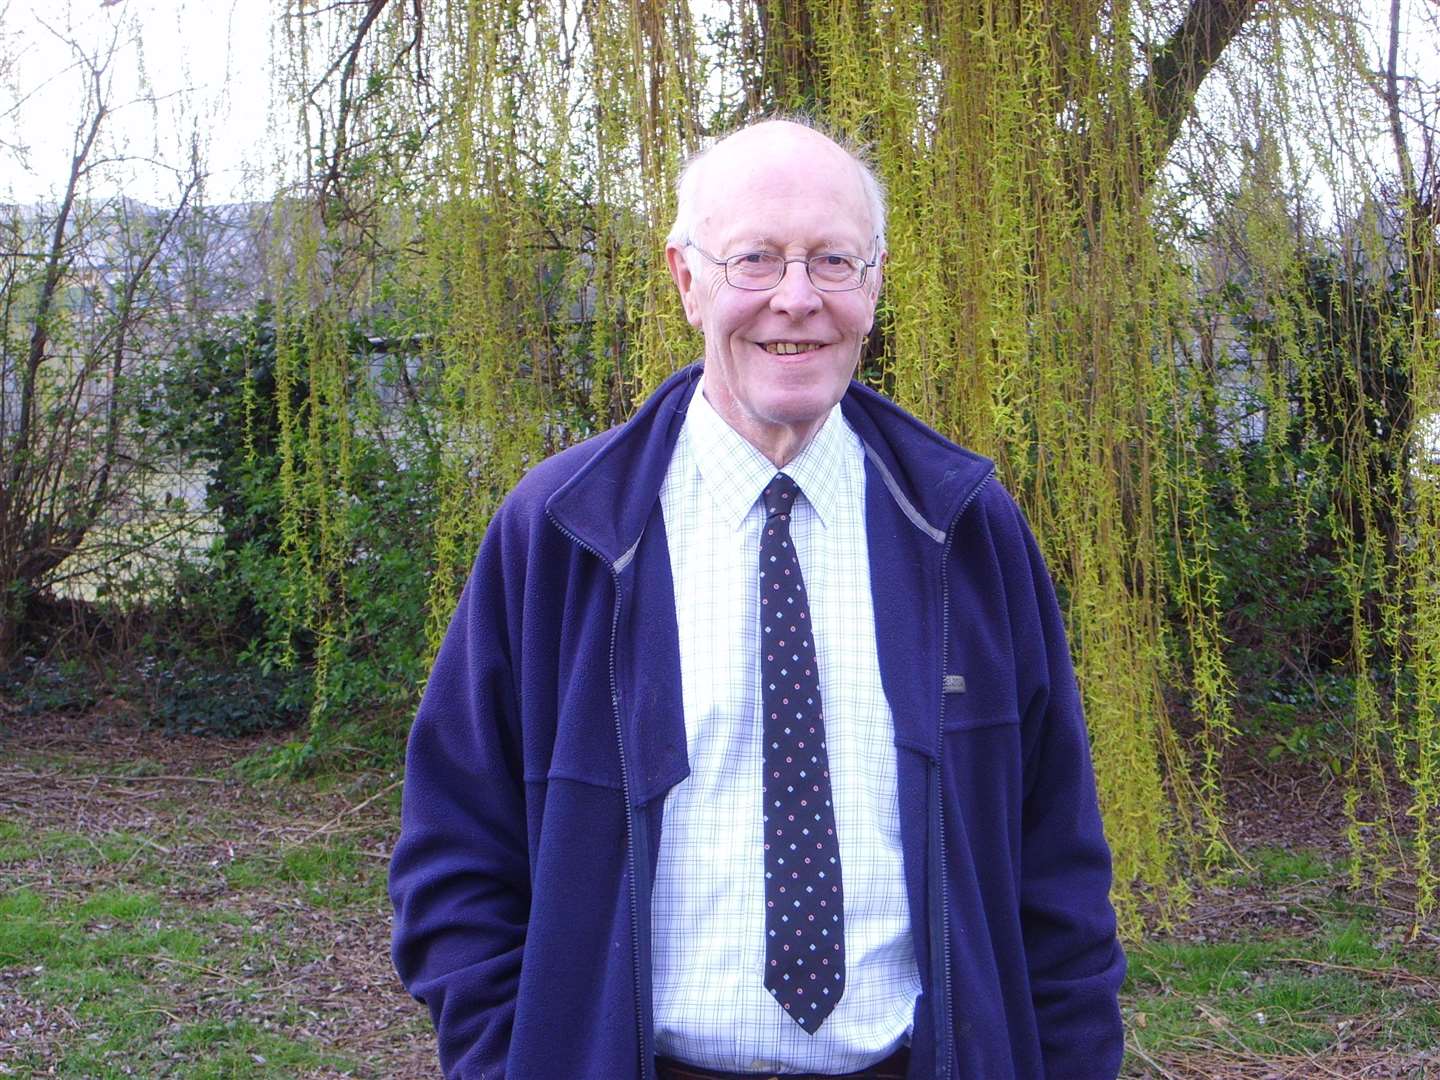 Mr Henderson was active in the Faversham community